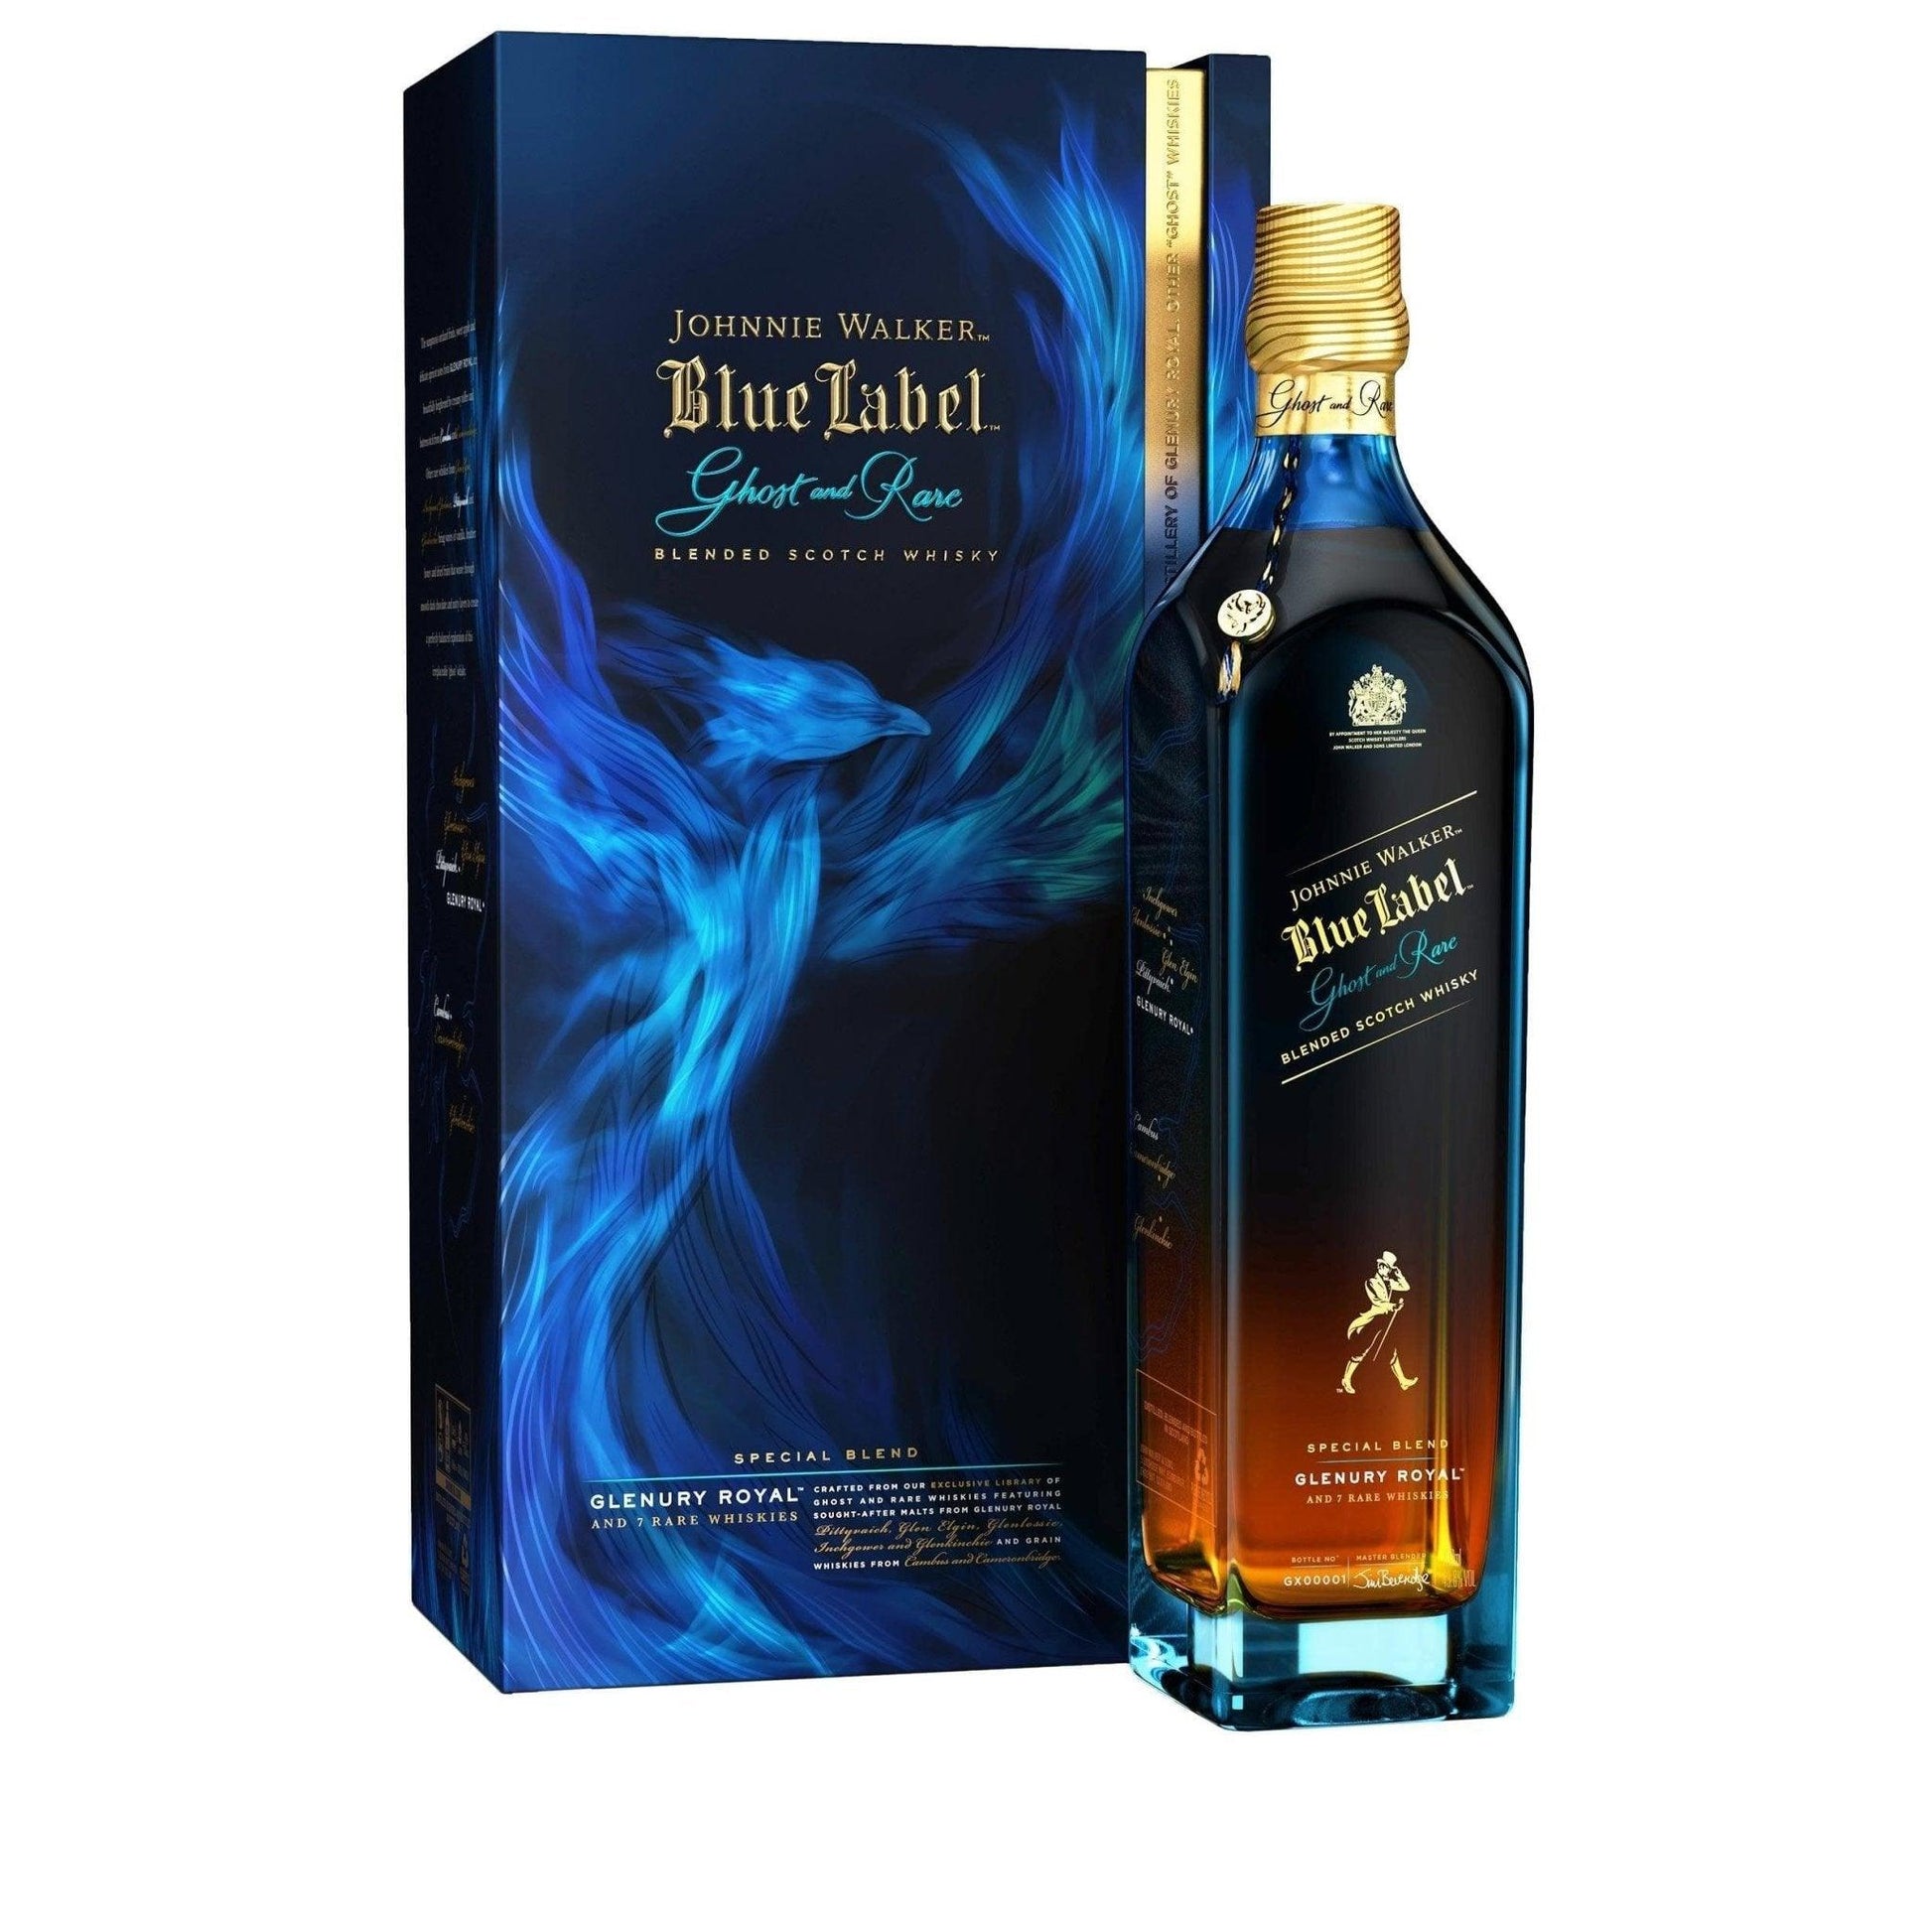 Johnnie Walker Blue Label Ghost and Rare Glenury Royal Blended Scotch Whisky 750ml - Booze House